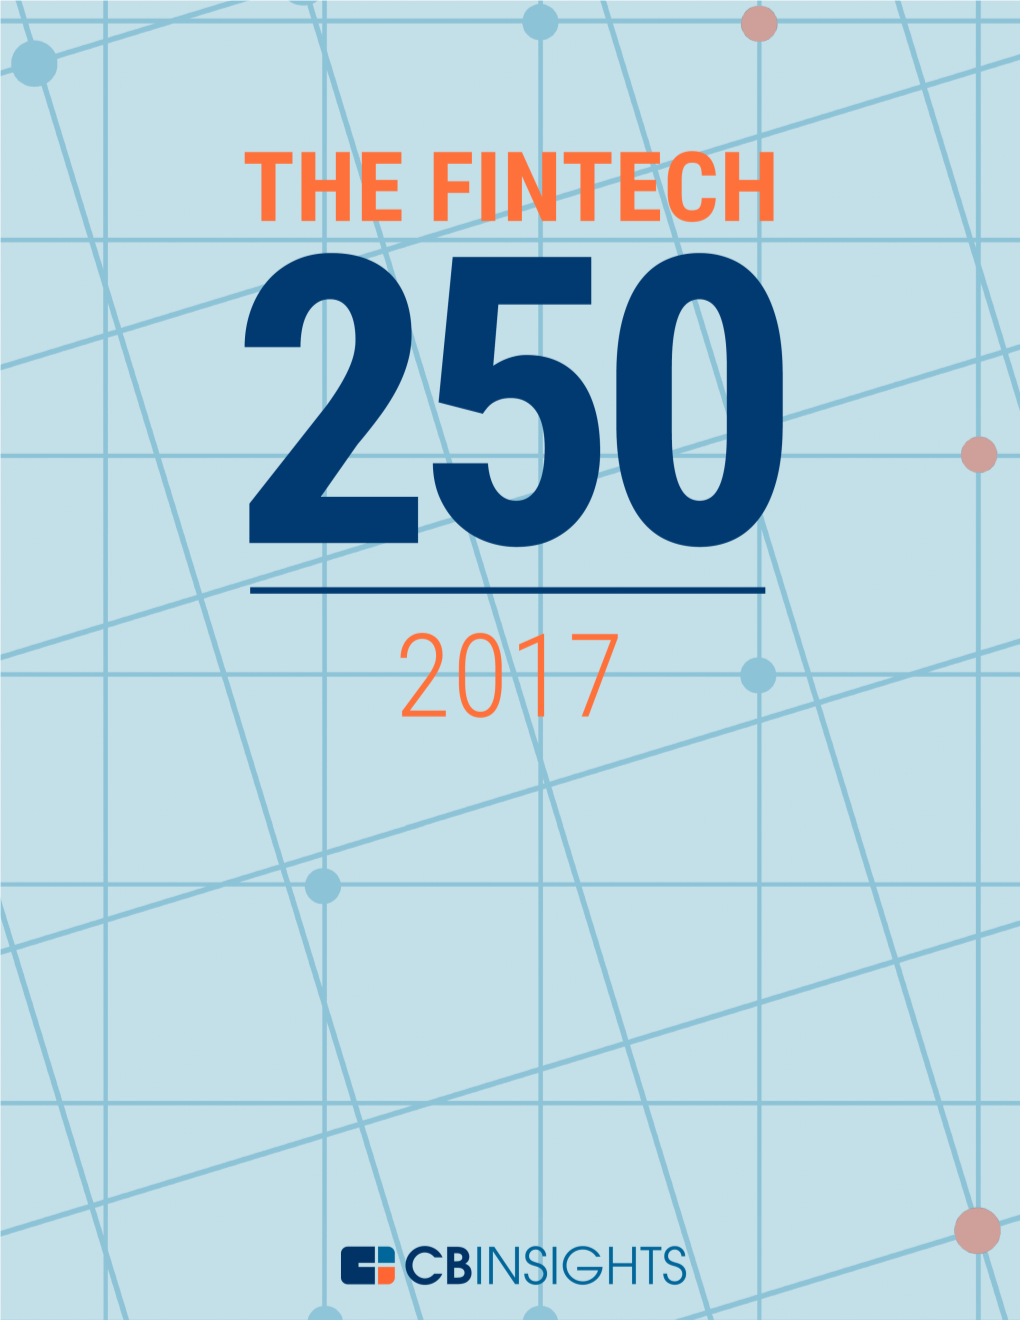 The Fintech 250 Is a List Created by CB Insights Recognizing the 250 Top Private Companies Changing the Face of Financial Services Around the World